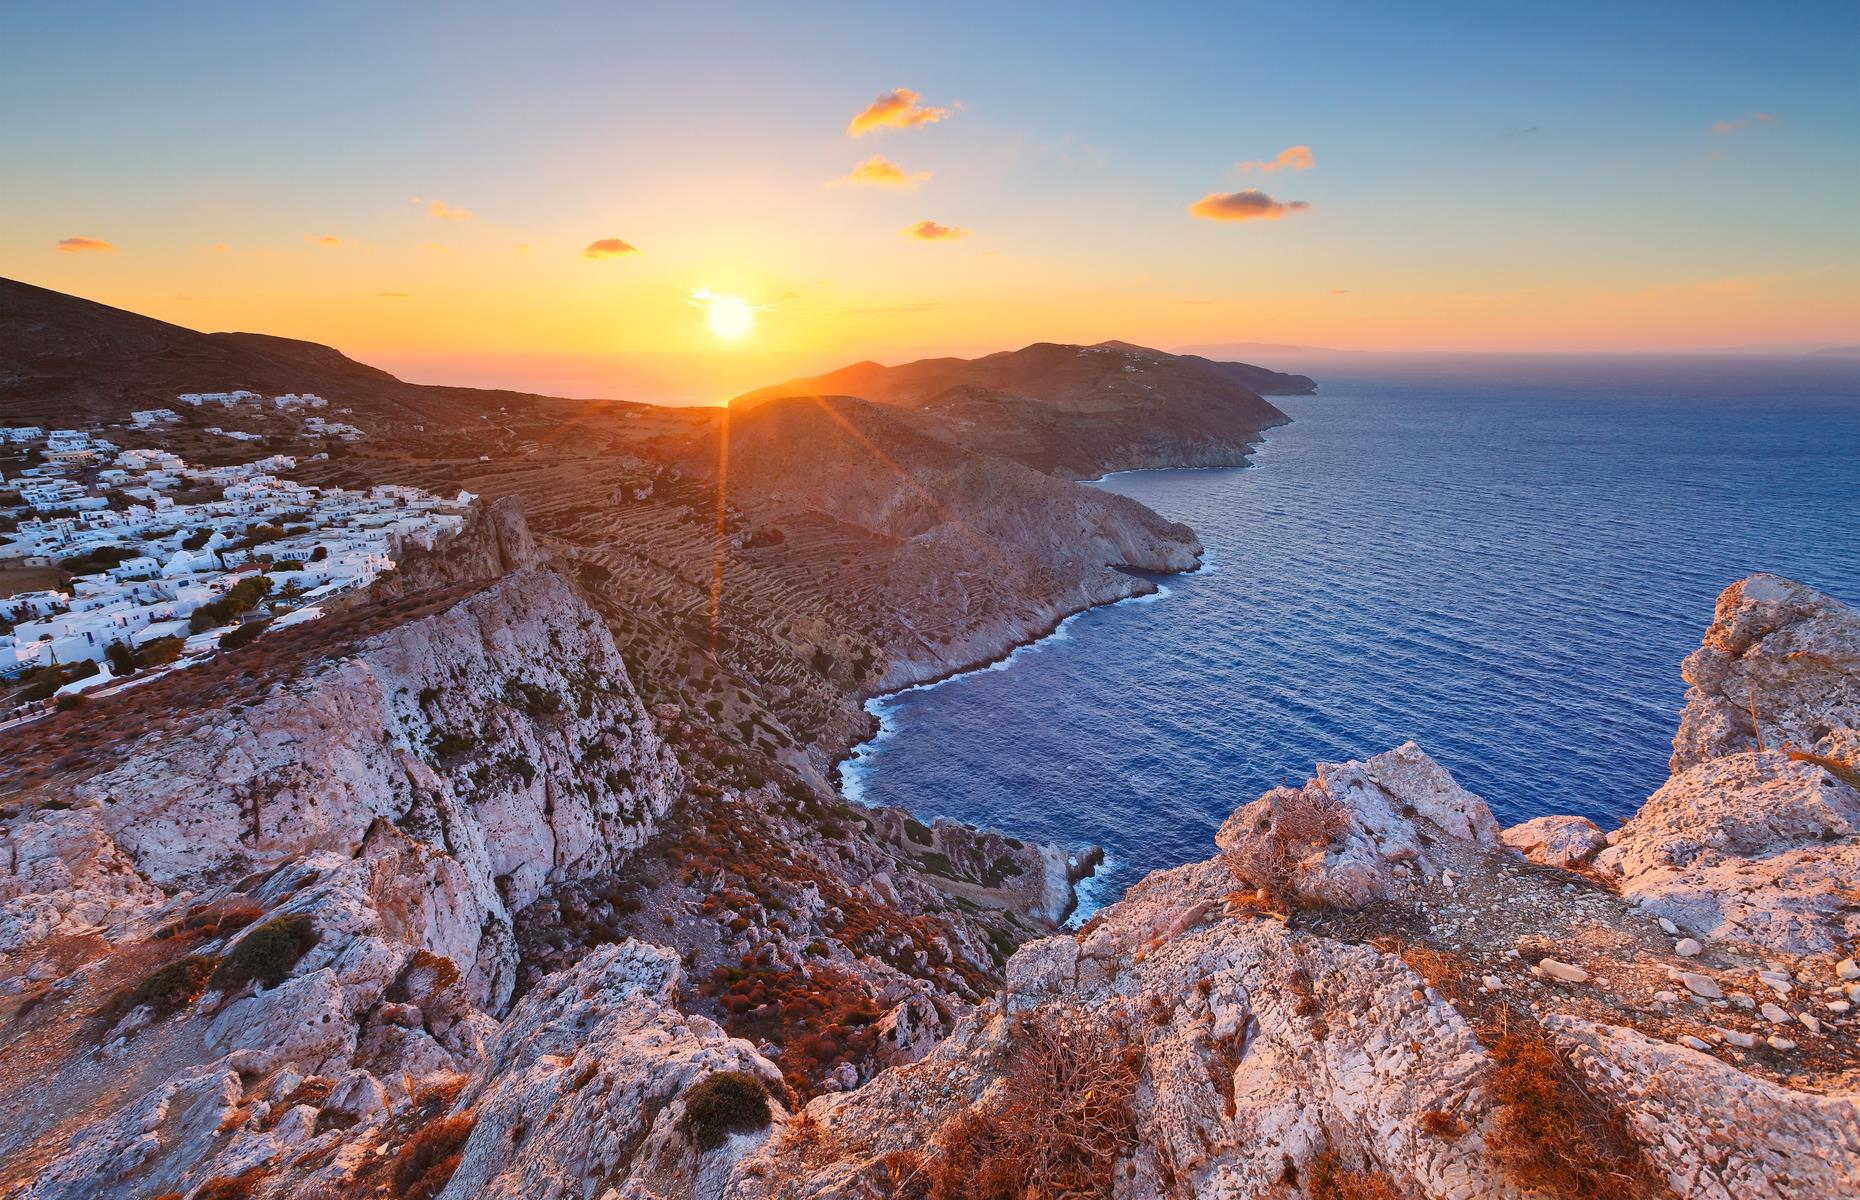 This 12-square-mile (32sq km) rocky island in the Cyclades is as far removed from thronged Santorini and Mykonos as you can imagine. With no direct flights or cruise ships, this is a place to retreat to for a slice of traditional Greek island life. Folegandros is on the ferry line from Piraeus to Santorini, or you can fly to Milos or Santorini and hop on the hour-long ferry. So if it's solo swims in the Aegean, sleepy days and unobscured sunset views you're after, look no further.